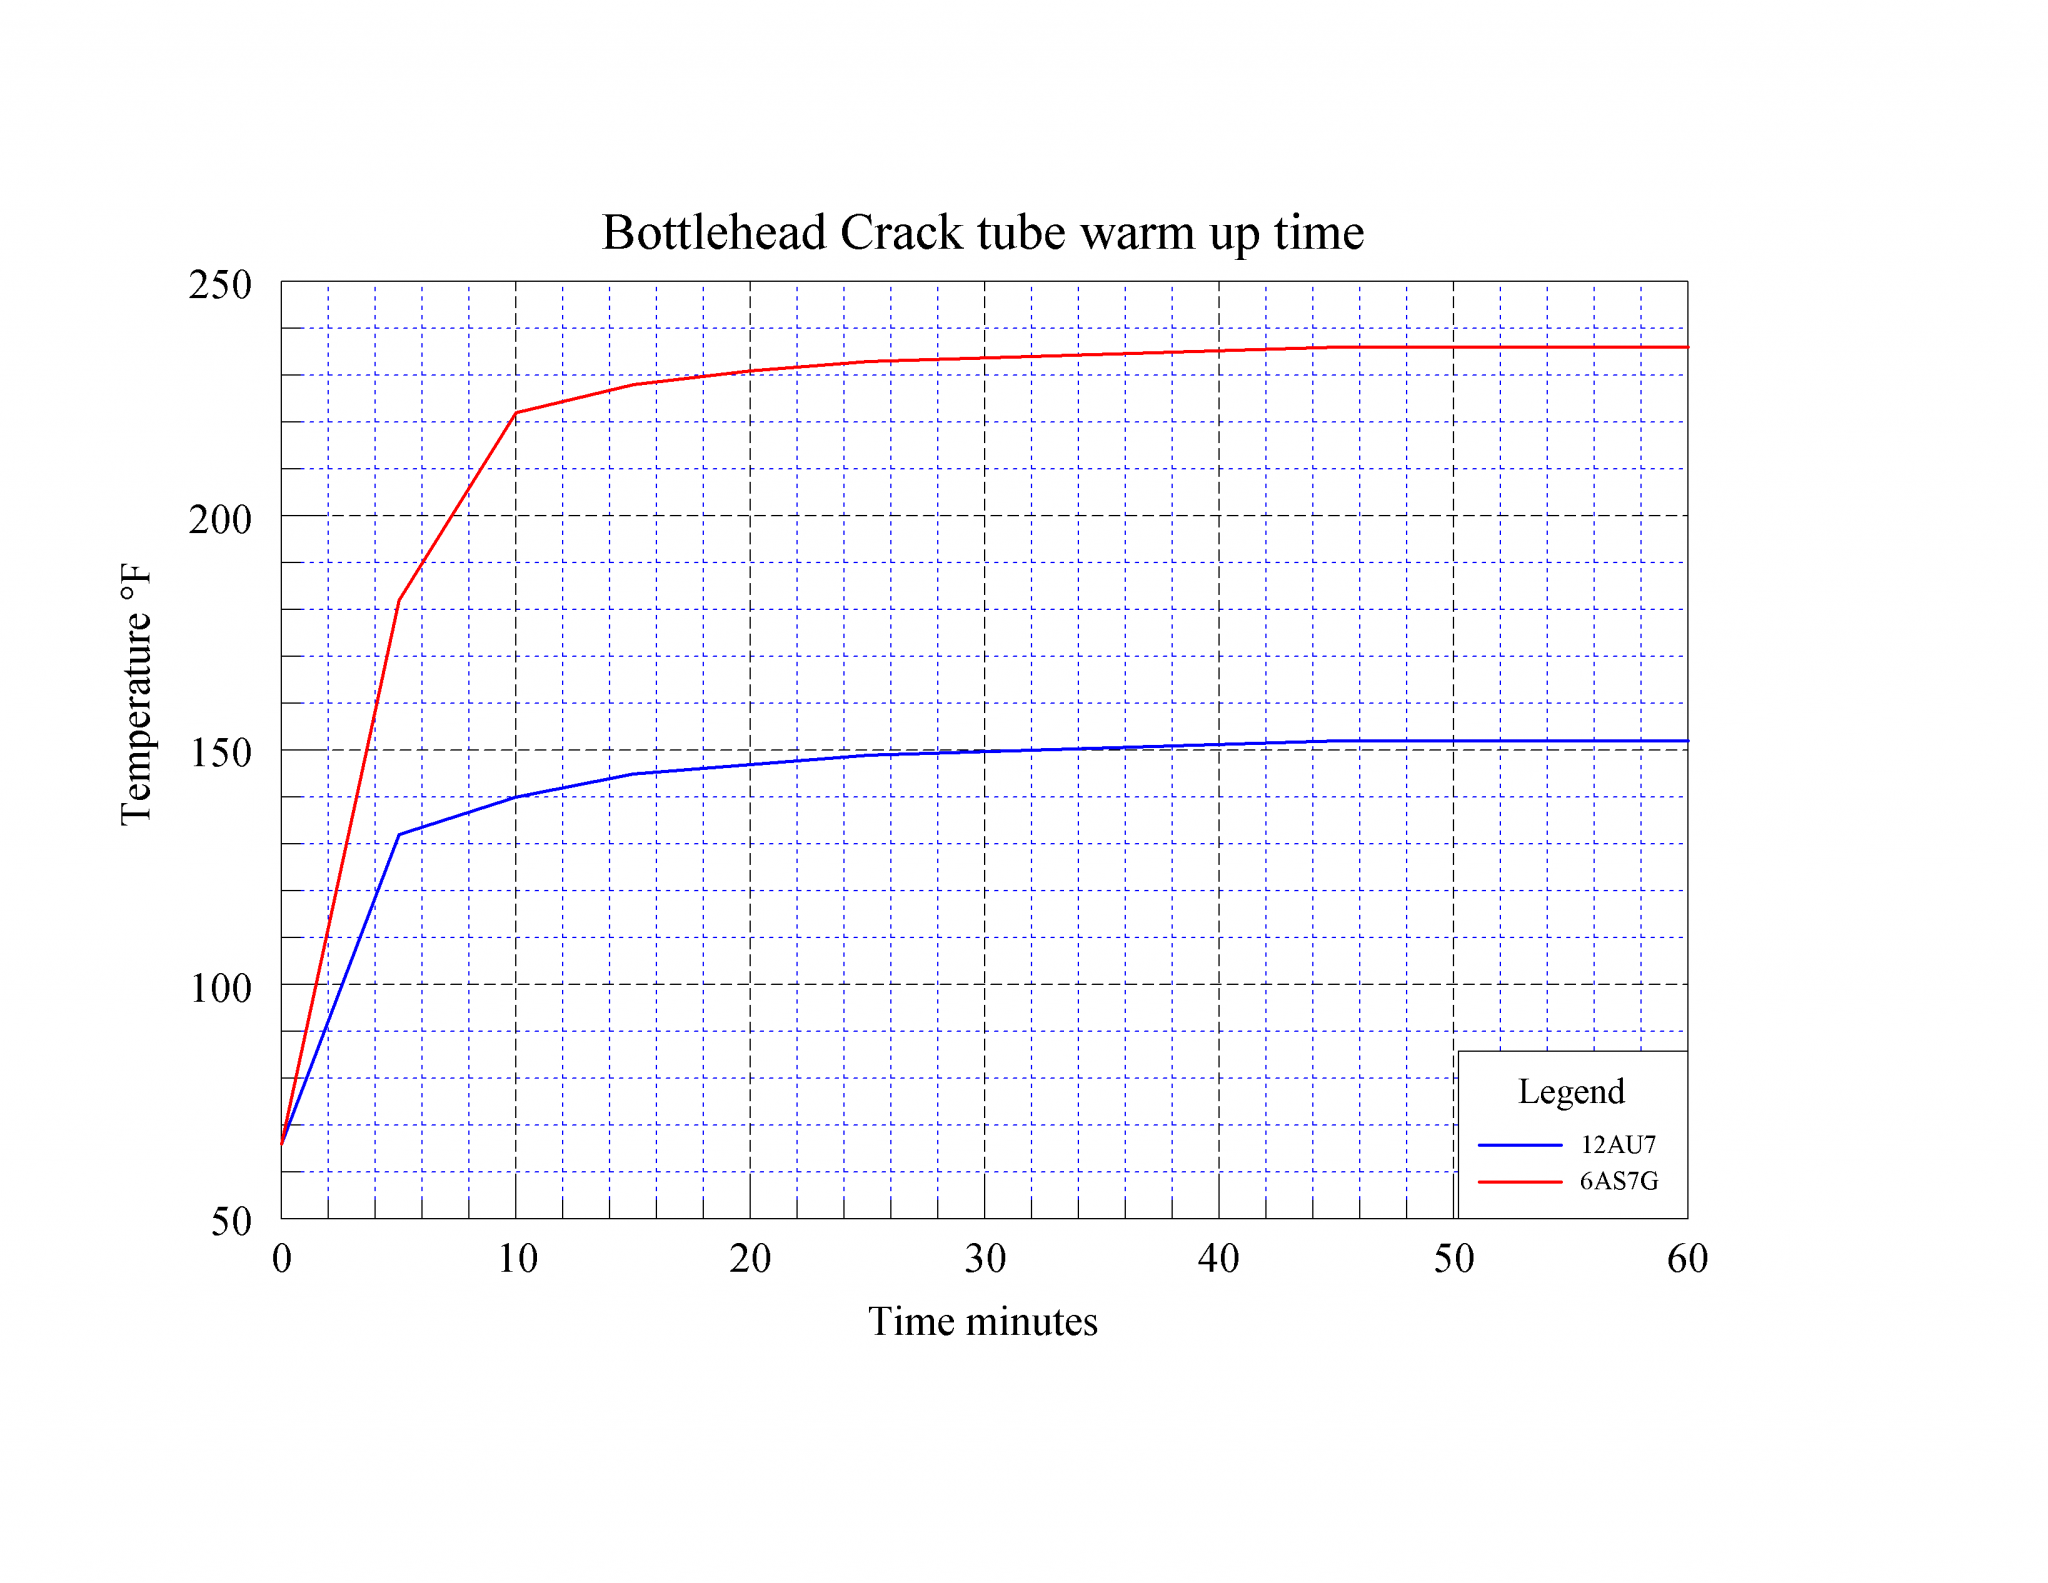 BH Crack 6AS7 - 12AU7 tube warmup time - PSI plot version.png